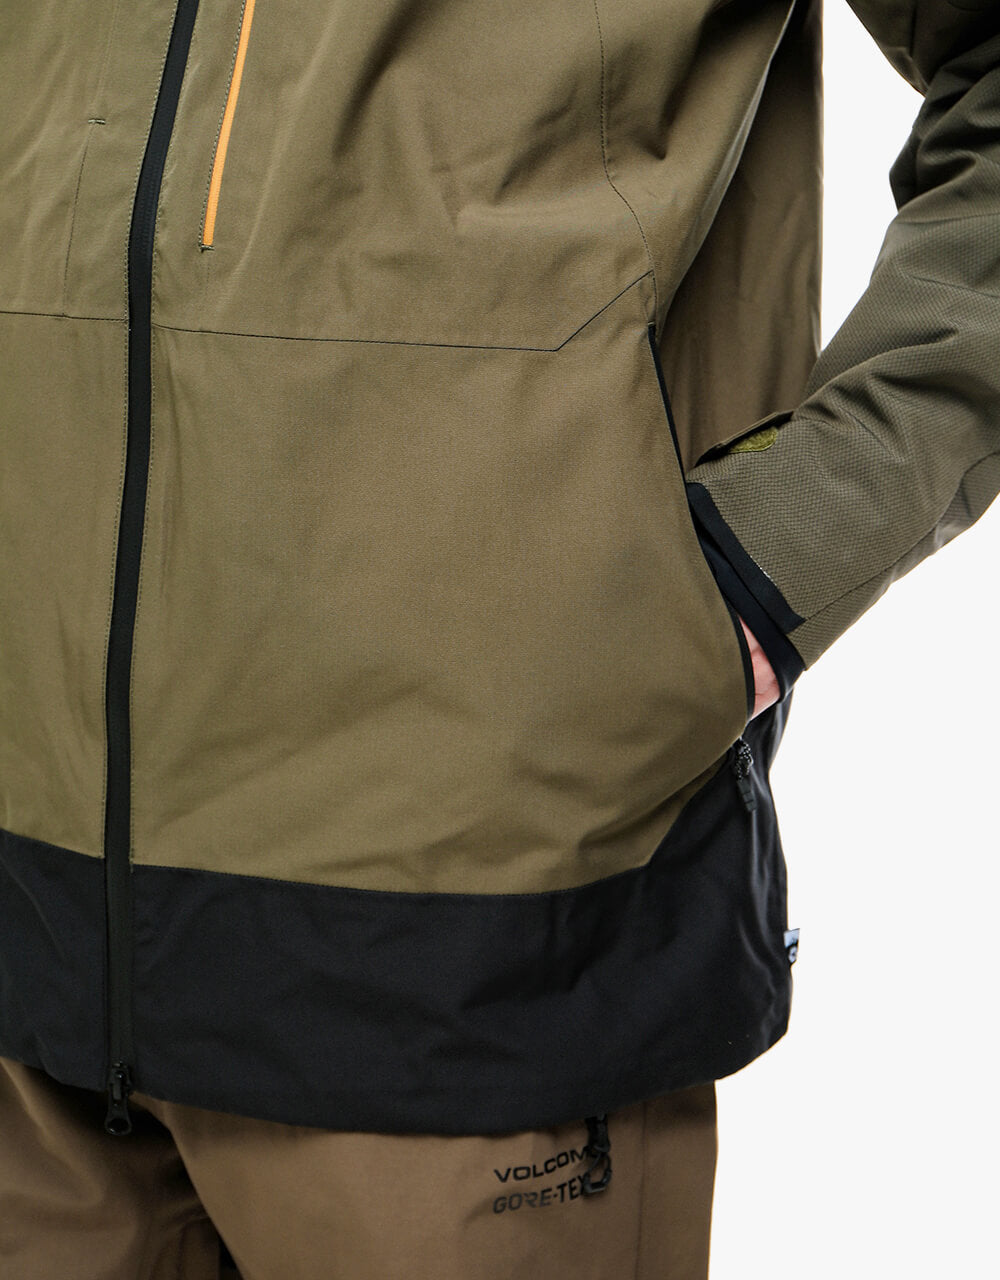 Picture Track Snowboard Jacket - Dusty Olive